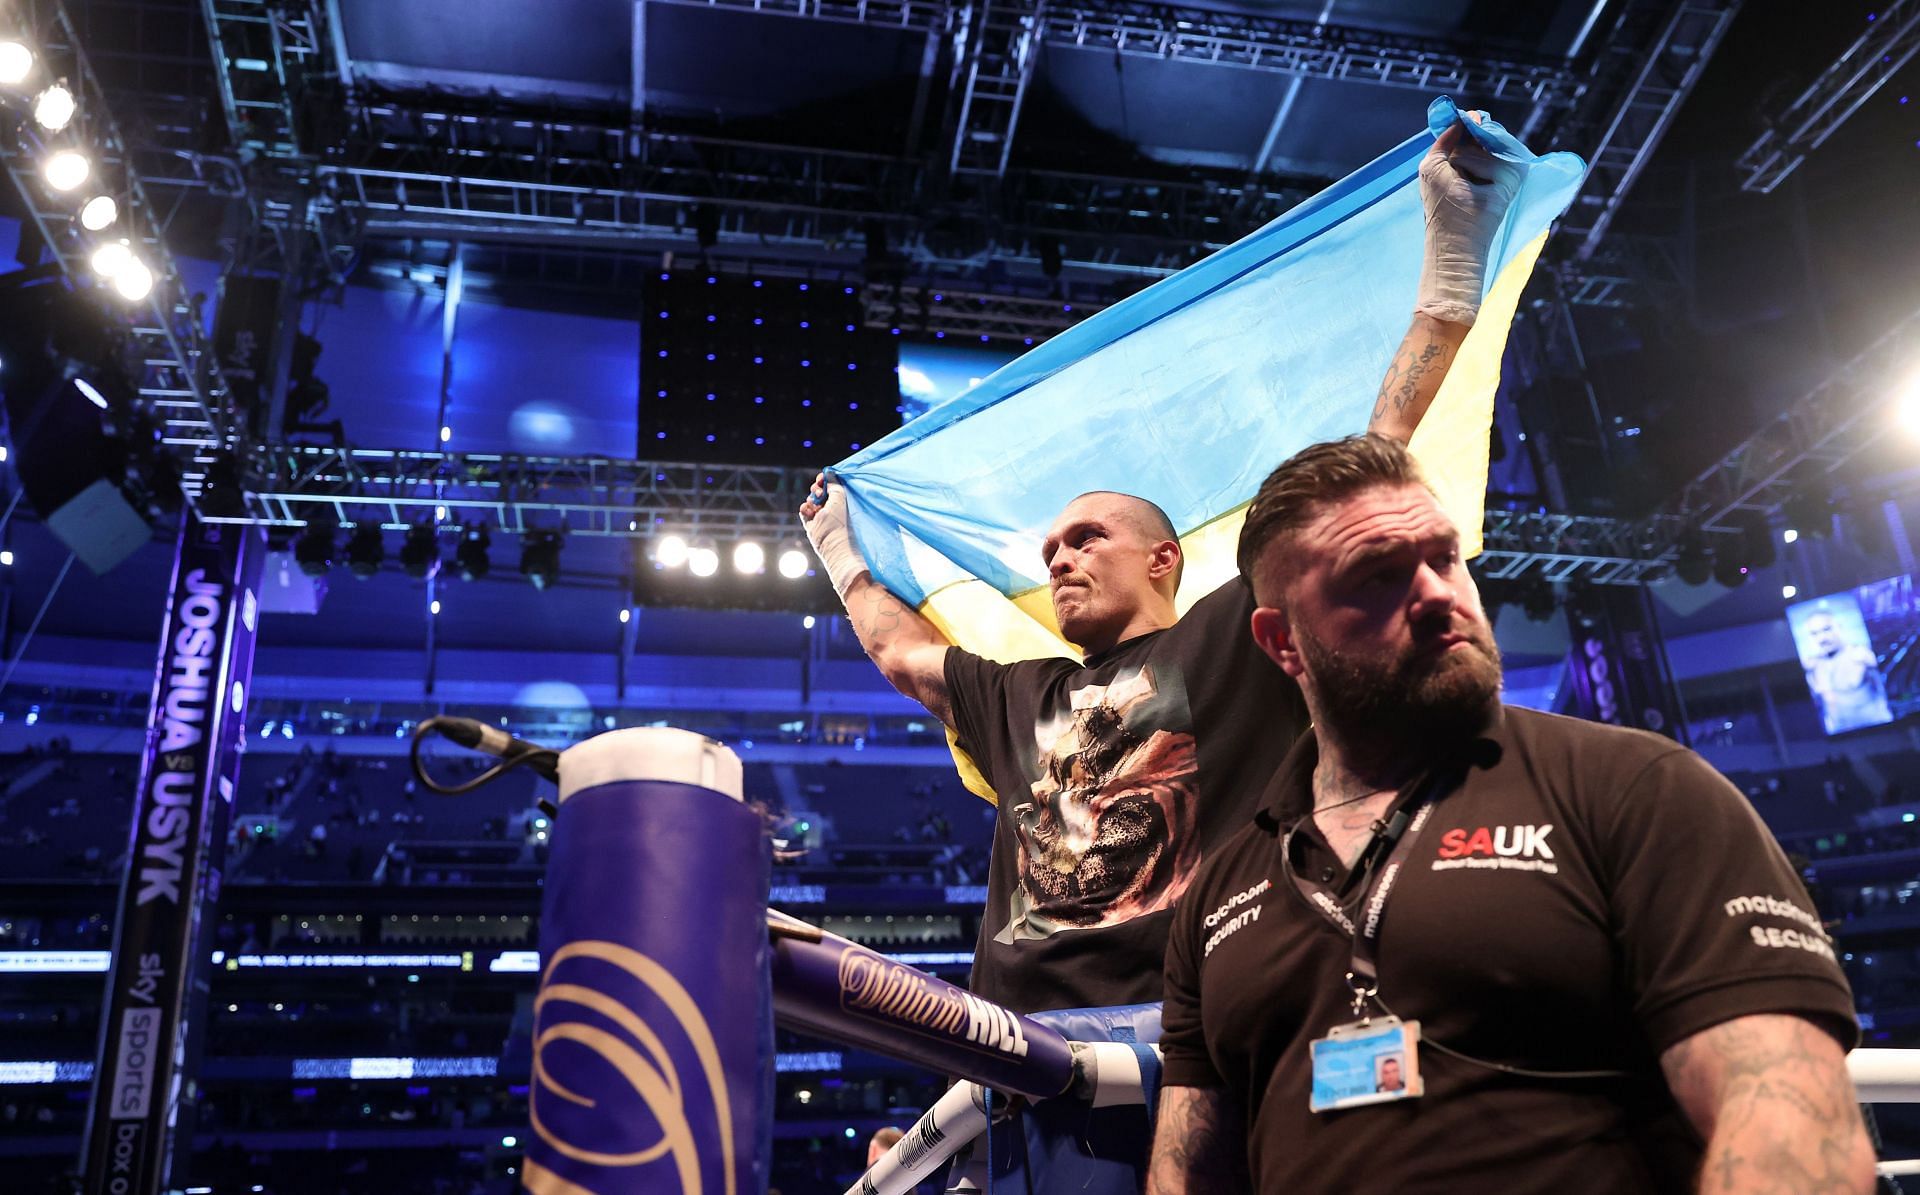 Oleksandr Usyk decided to sing after his staredown with Anthony Joshua